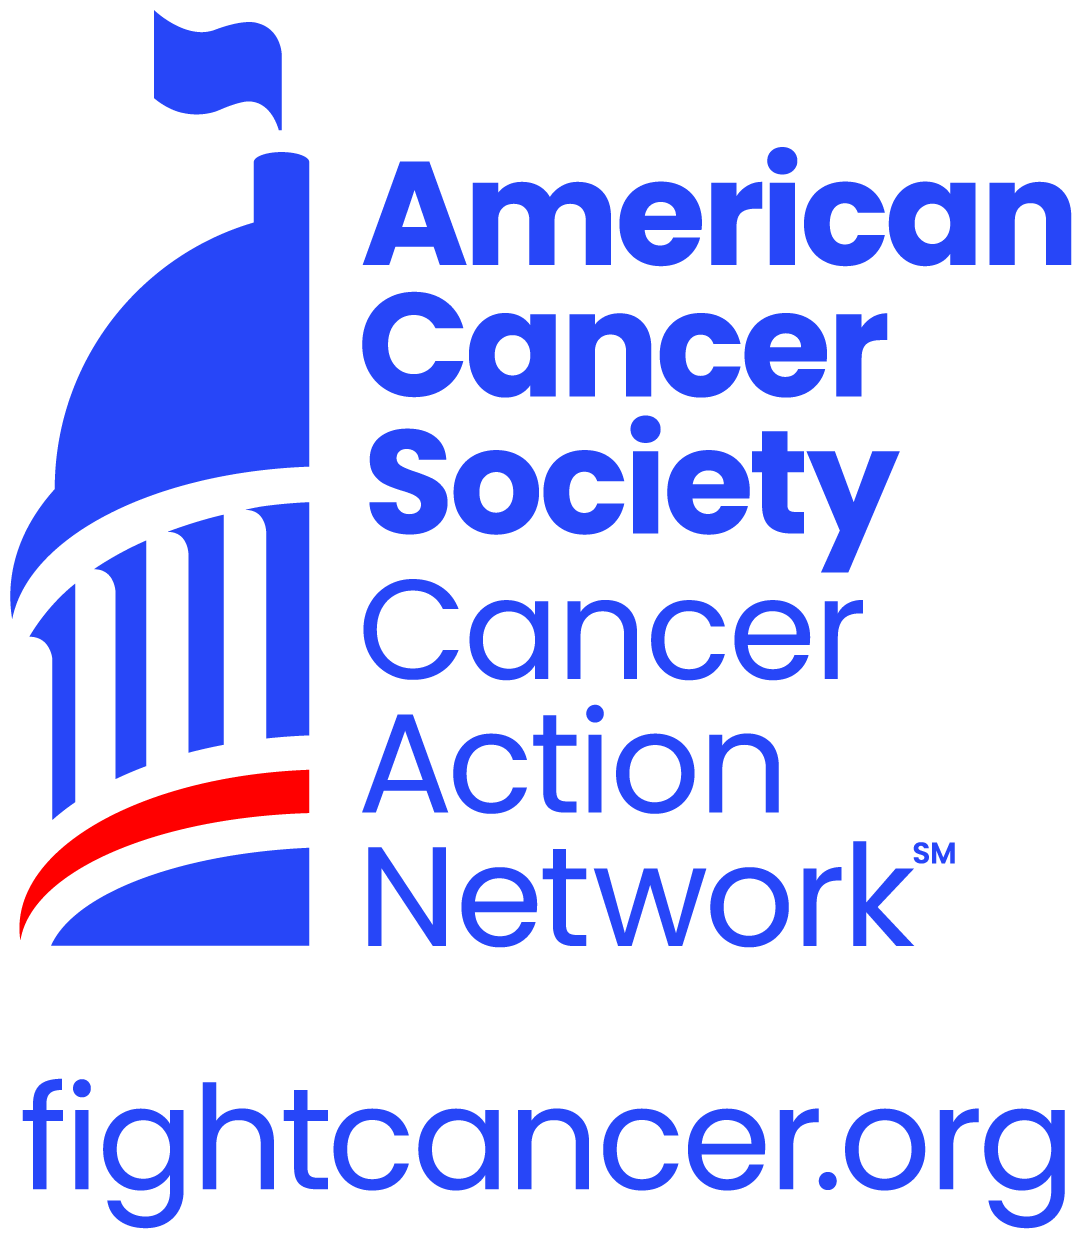 American Cancer Society Cancer Action Network